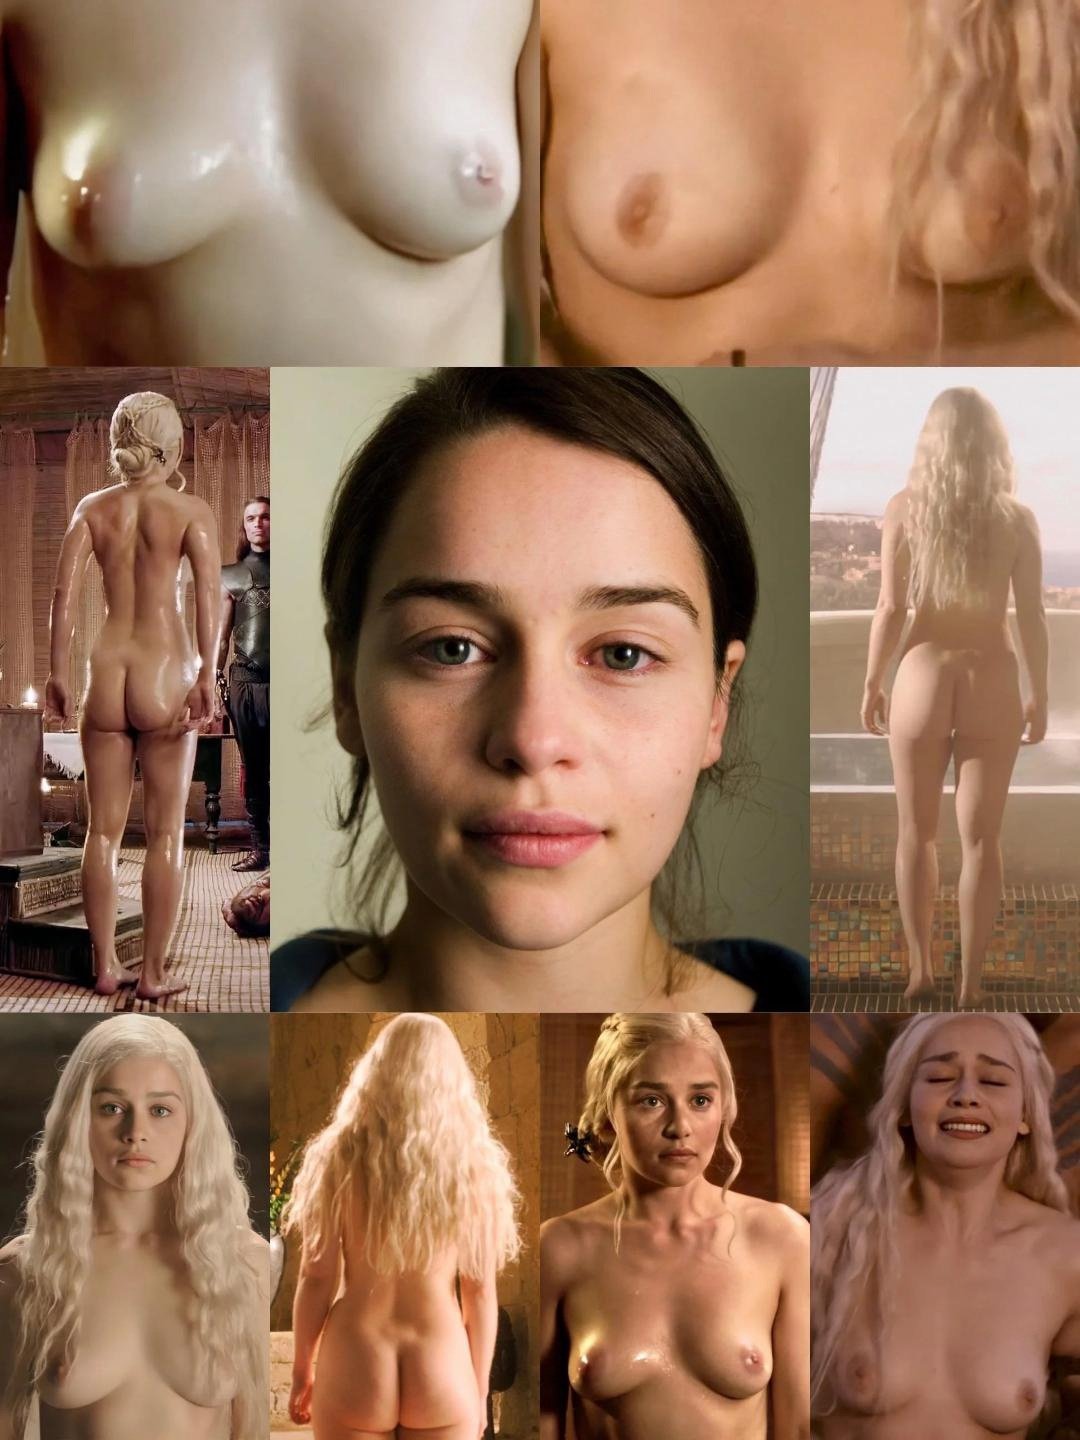 danny todman recommends emilia clarke naked pictures pic